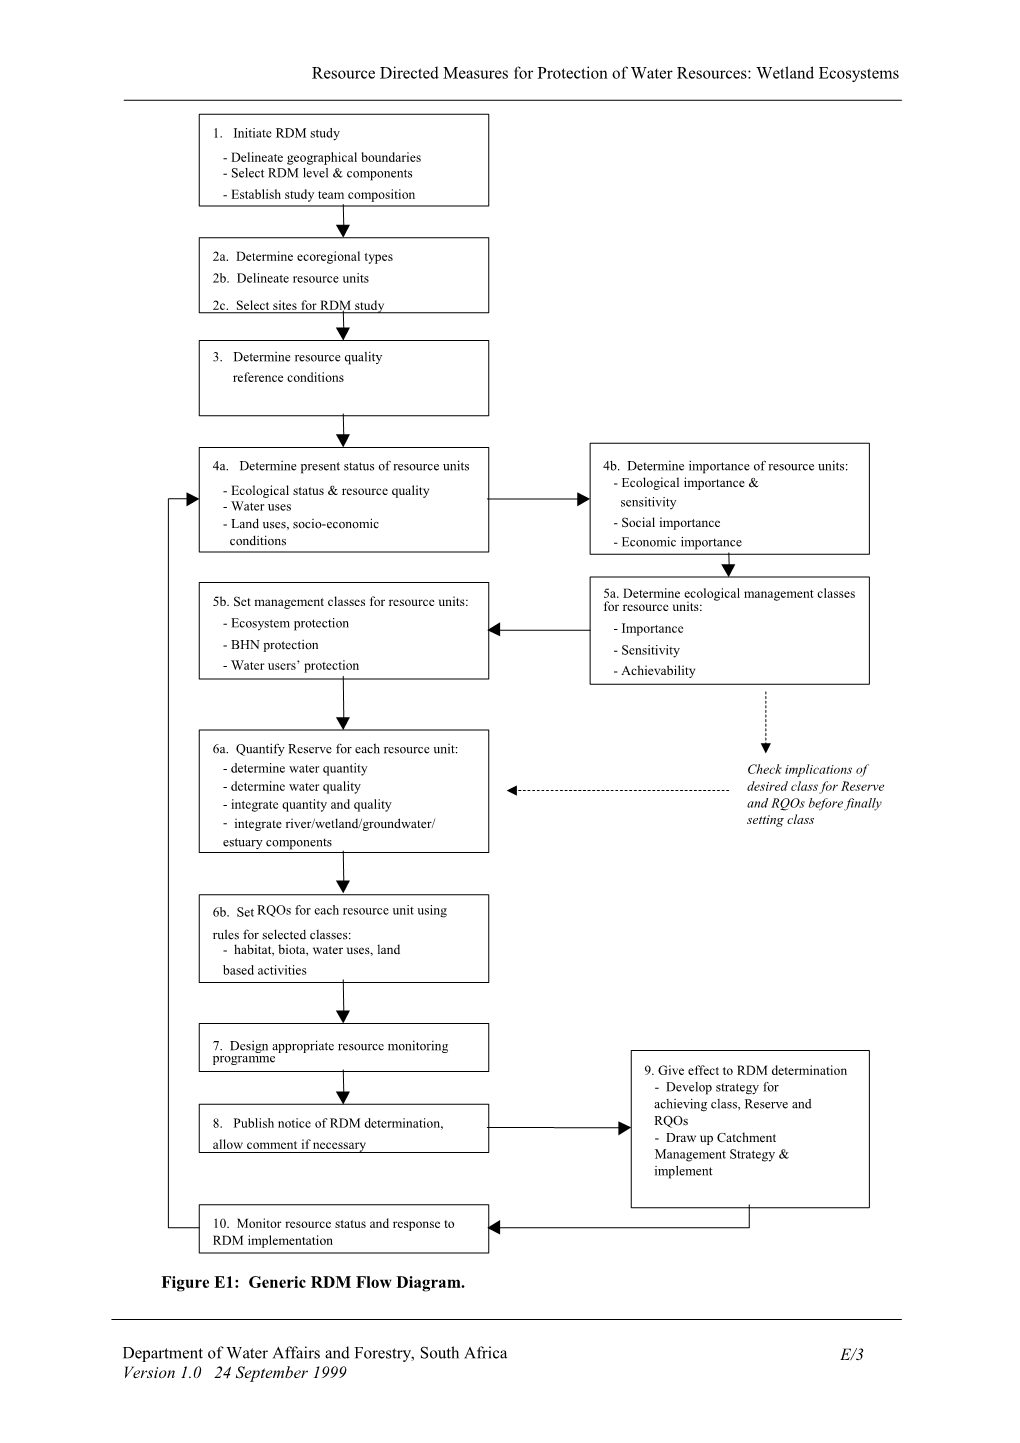 Section E: Procedure for Intermediate Determination of Rdm for Wetland Ecosystems